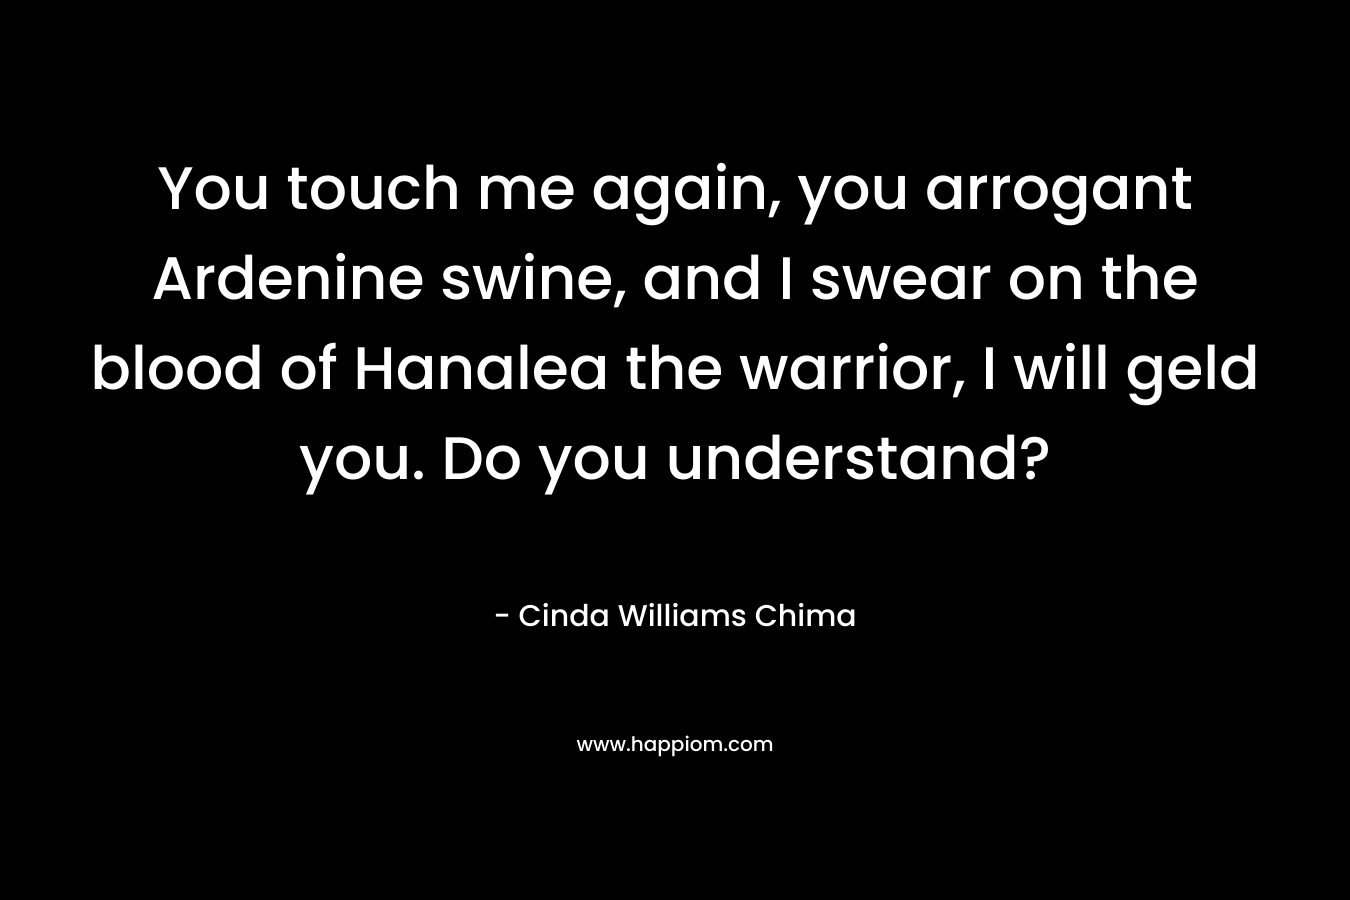 You touch me again, you arrogant Ardenine swine, and I swear on the blood of Hanalea the warrior, I will geld you. Do you understand? – Cinda Williams Chima